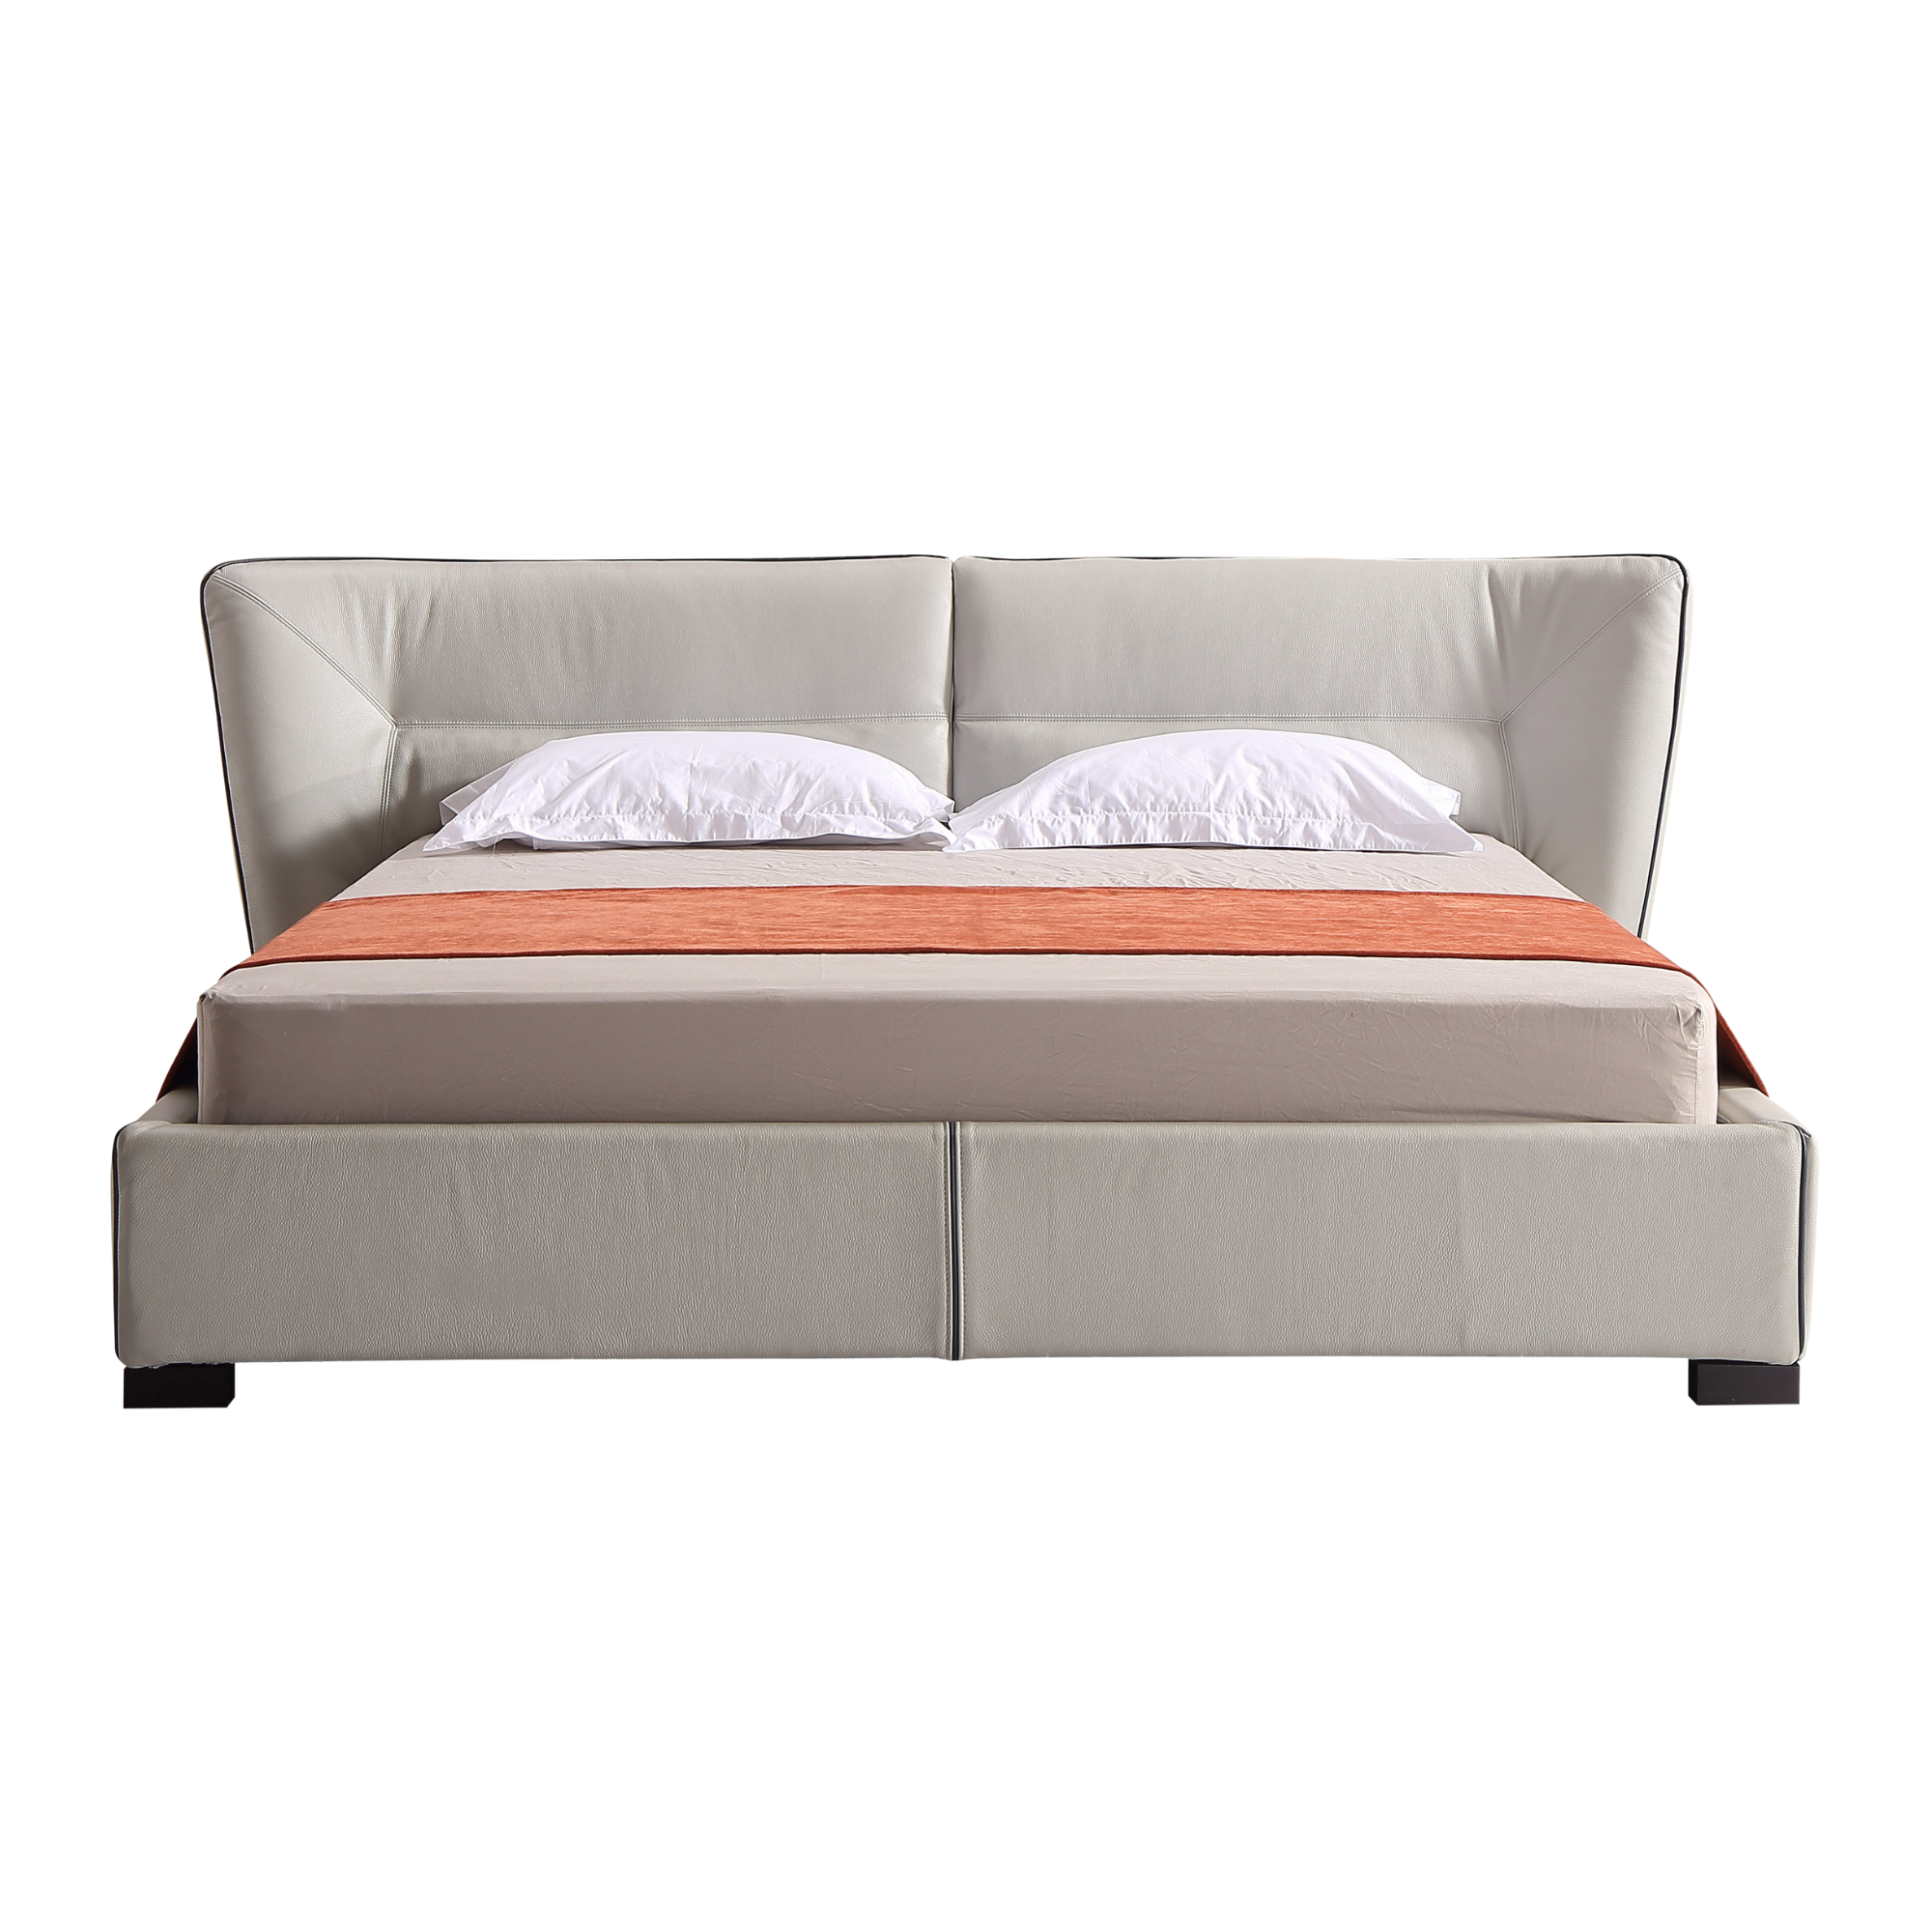 Object A146 Upholstered Bed Frame in Ivory Top Grain Genuine Leather